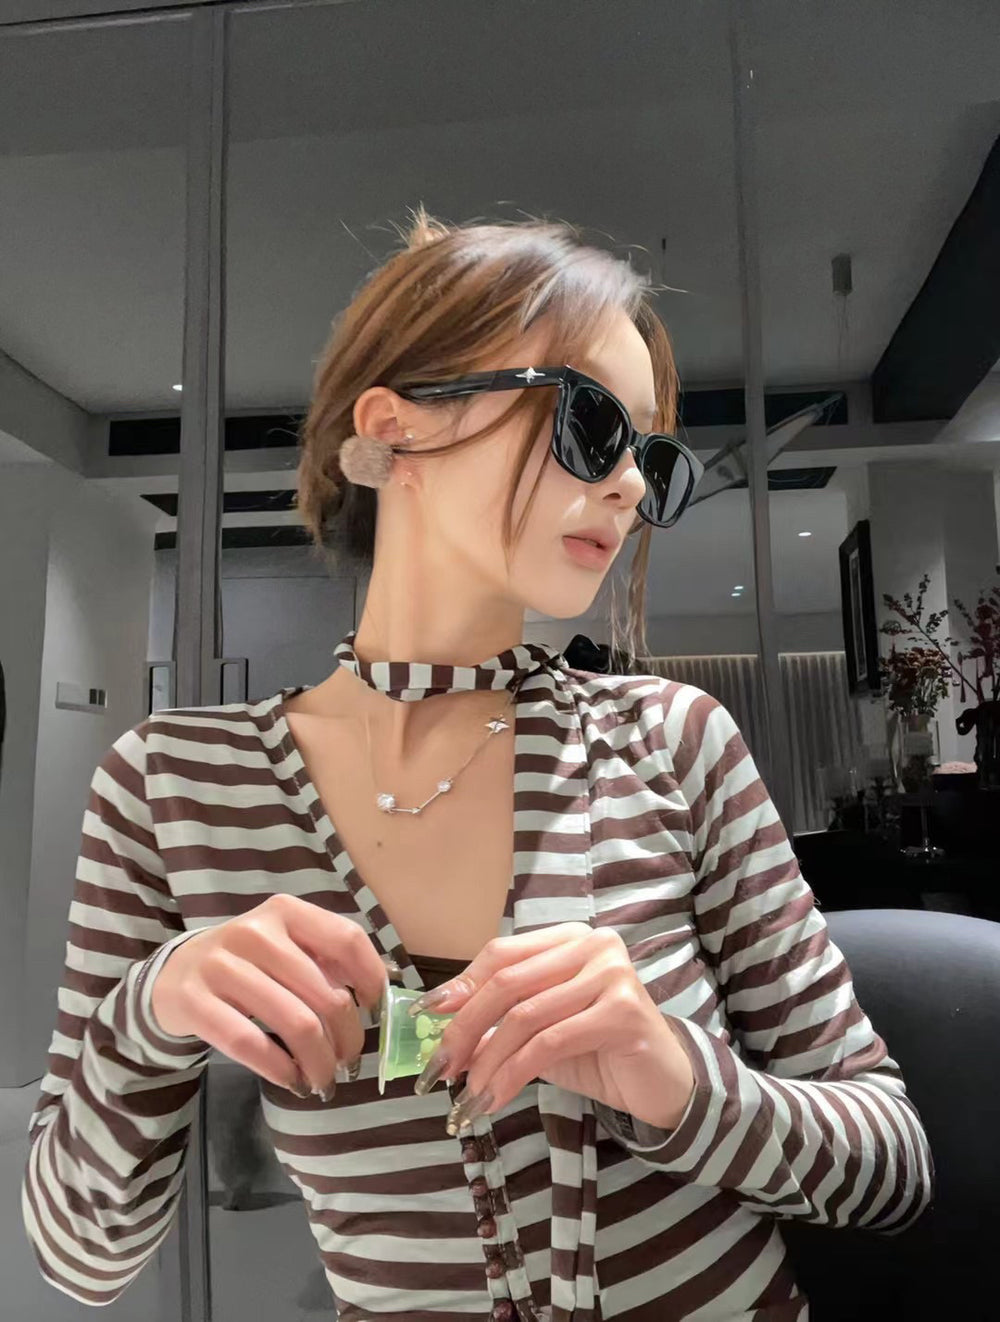 With her striped shirt and fashionable sunglasses, this woman exudes an aura of sophistication and impeccable style.